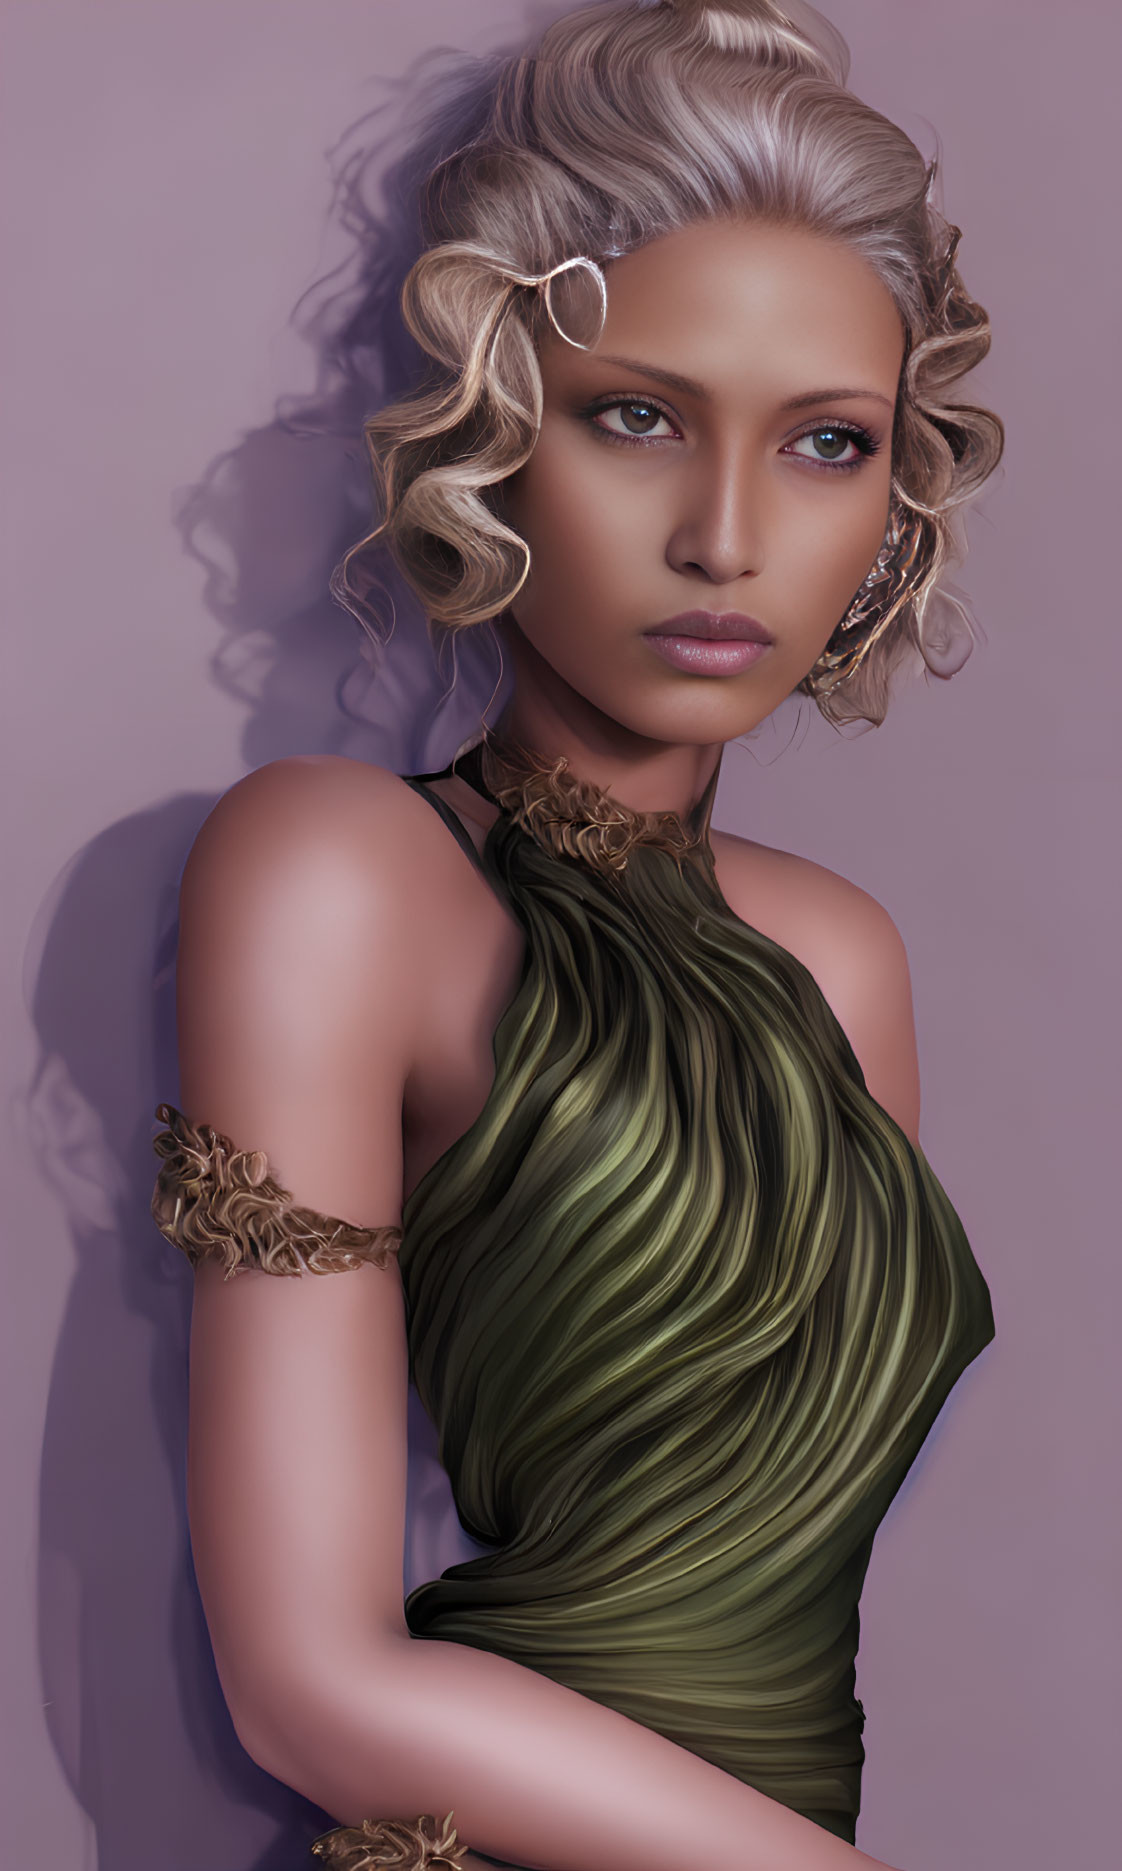 Digital artwork of a woman in green off-shoulder gown with curly hair and intense gaze